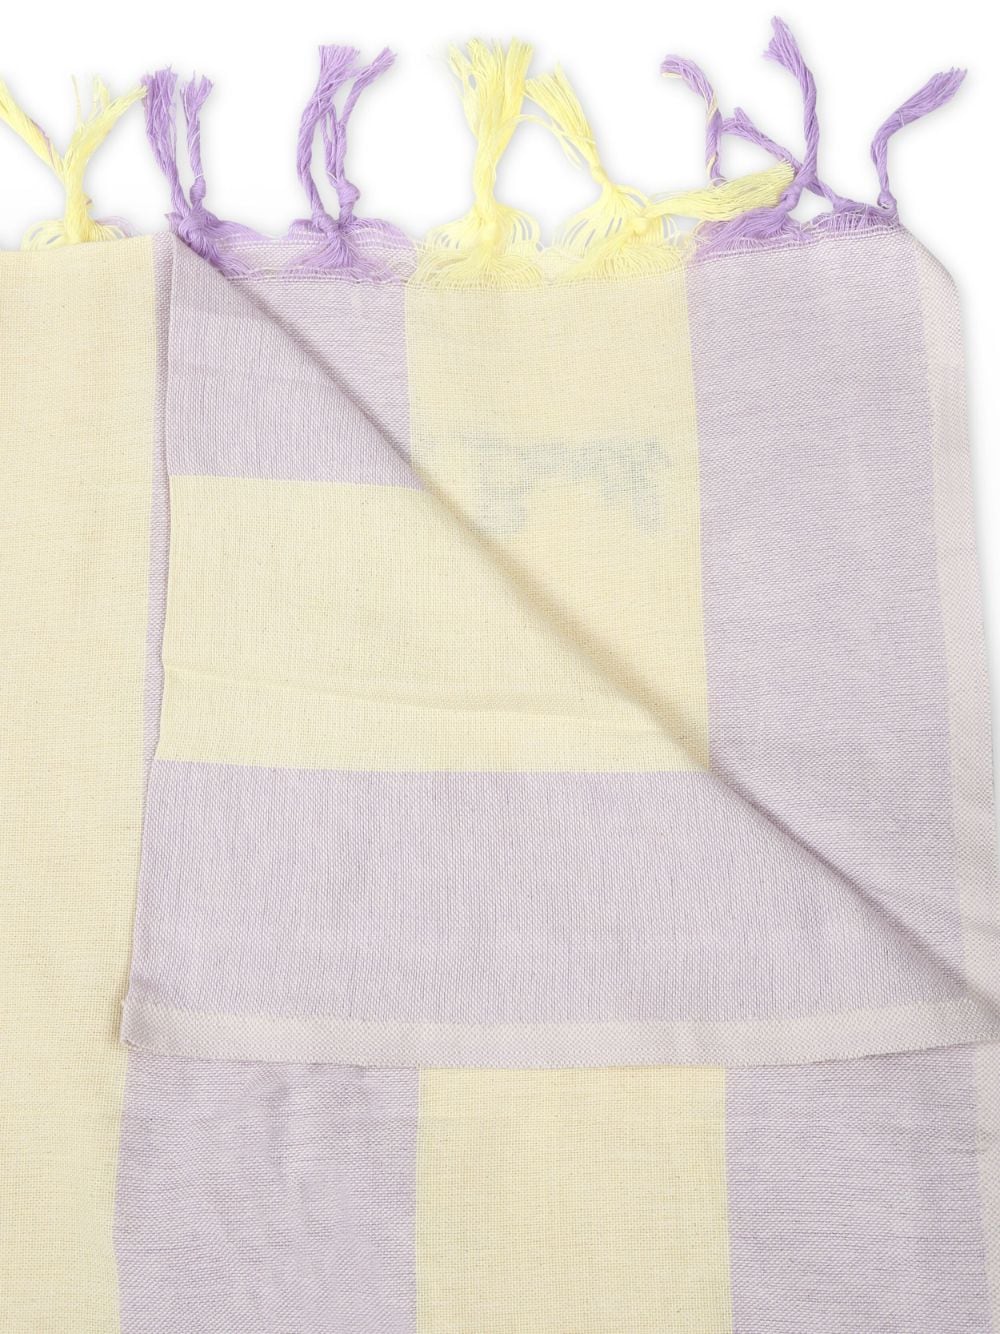 Purple and yellow towel for girls with logo